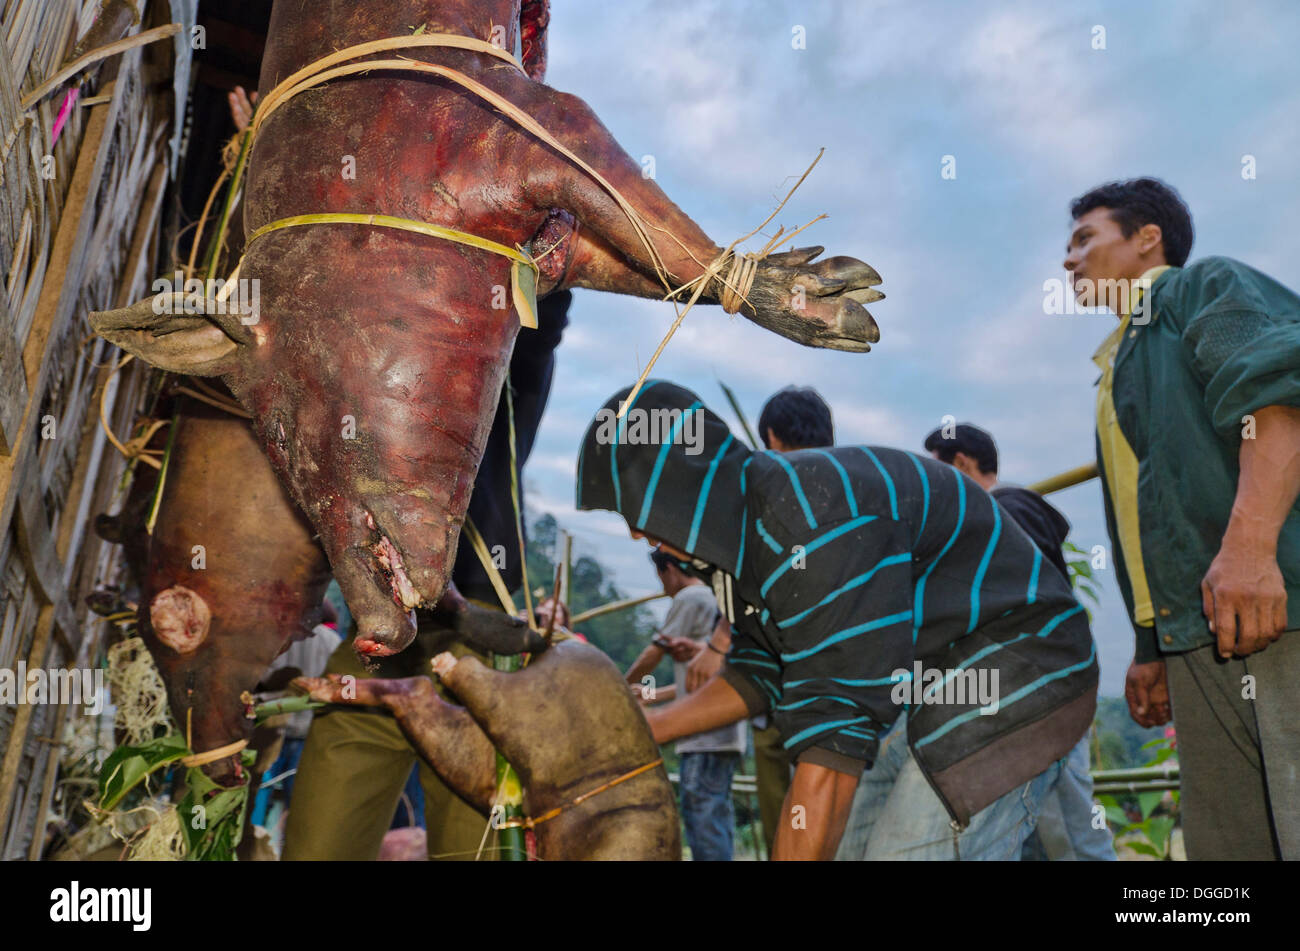 Villagers of the Nishi tribe offering smoked pork at a wedding ceremony in Peni village, India, Asia Stock Photo